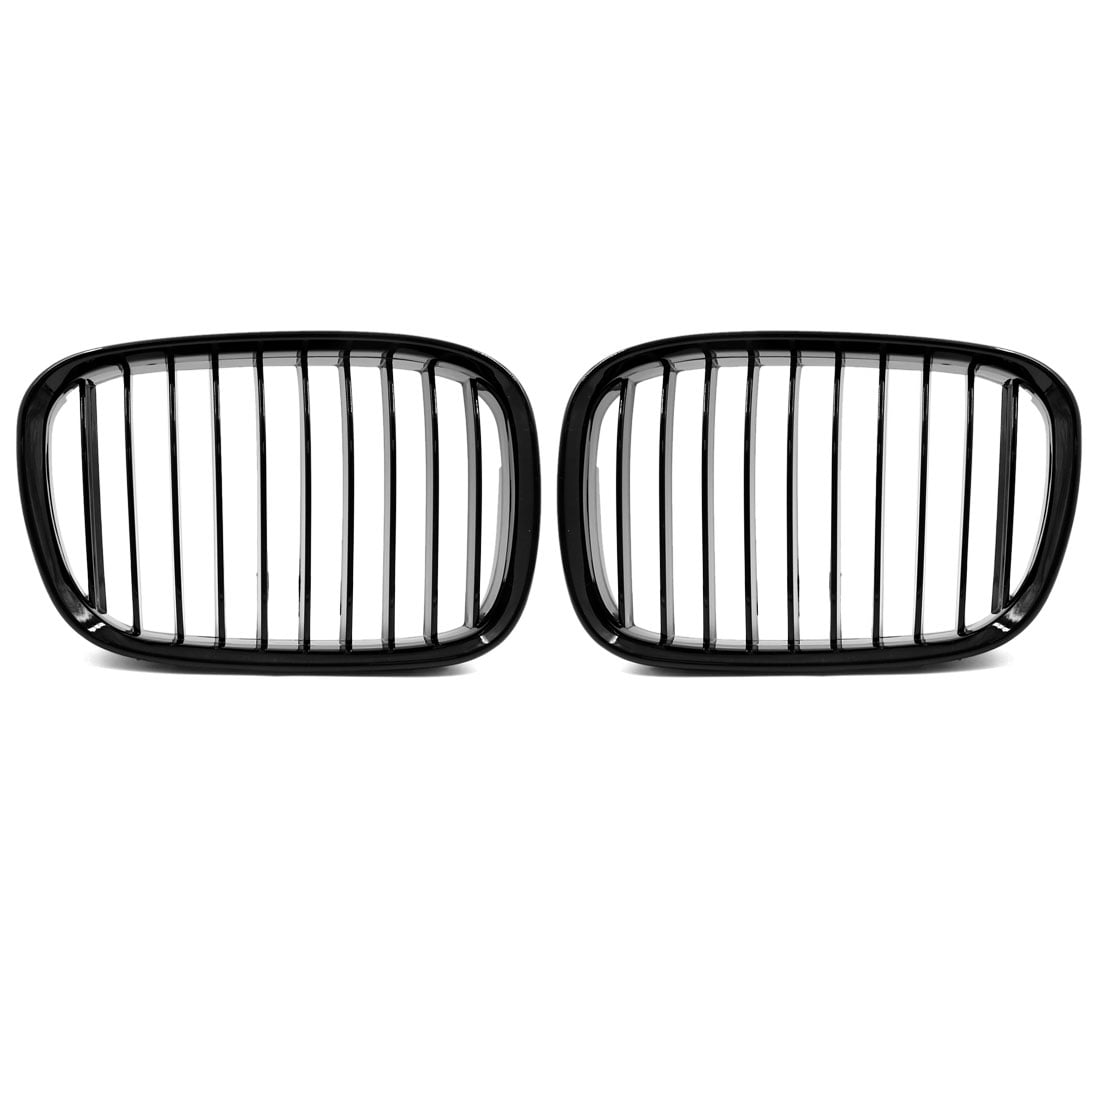 VOLL CHROM CHROME GRILL GRILLE  FRONTGRILL KÜHLERGRILL BMW E39 LIMOUSINE TOURING 